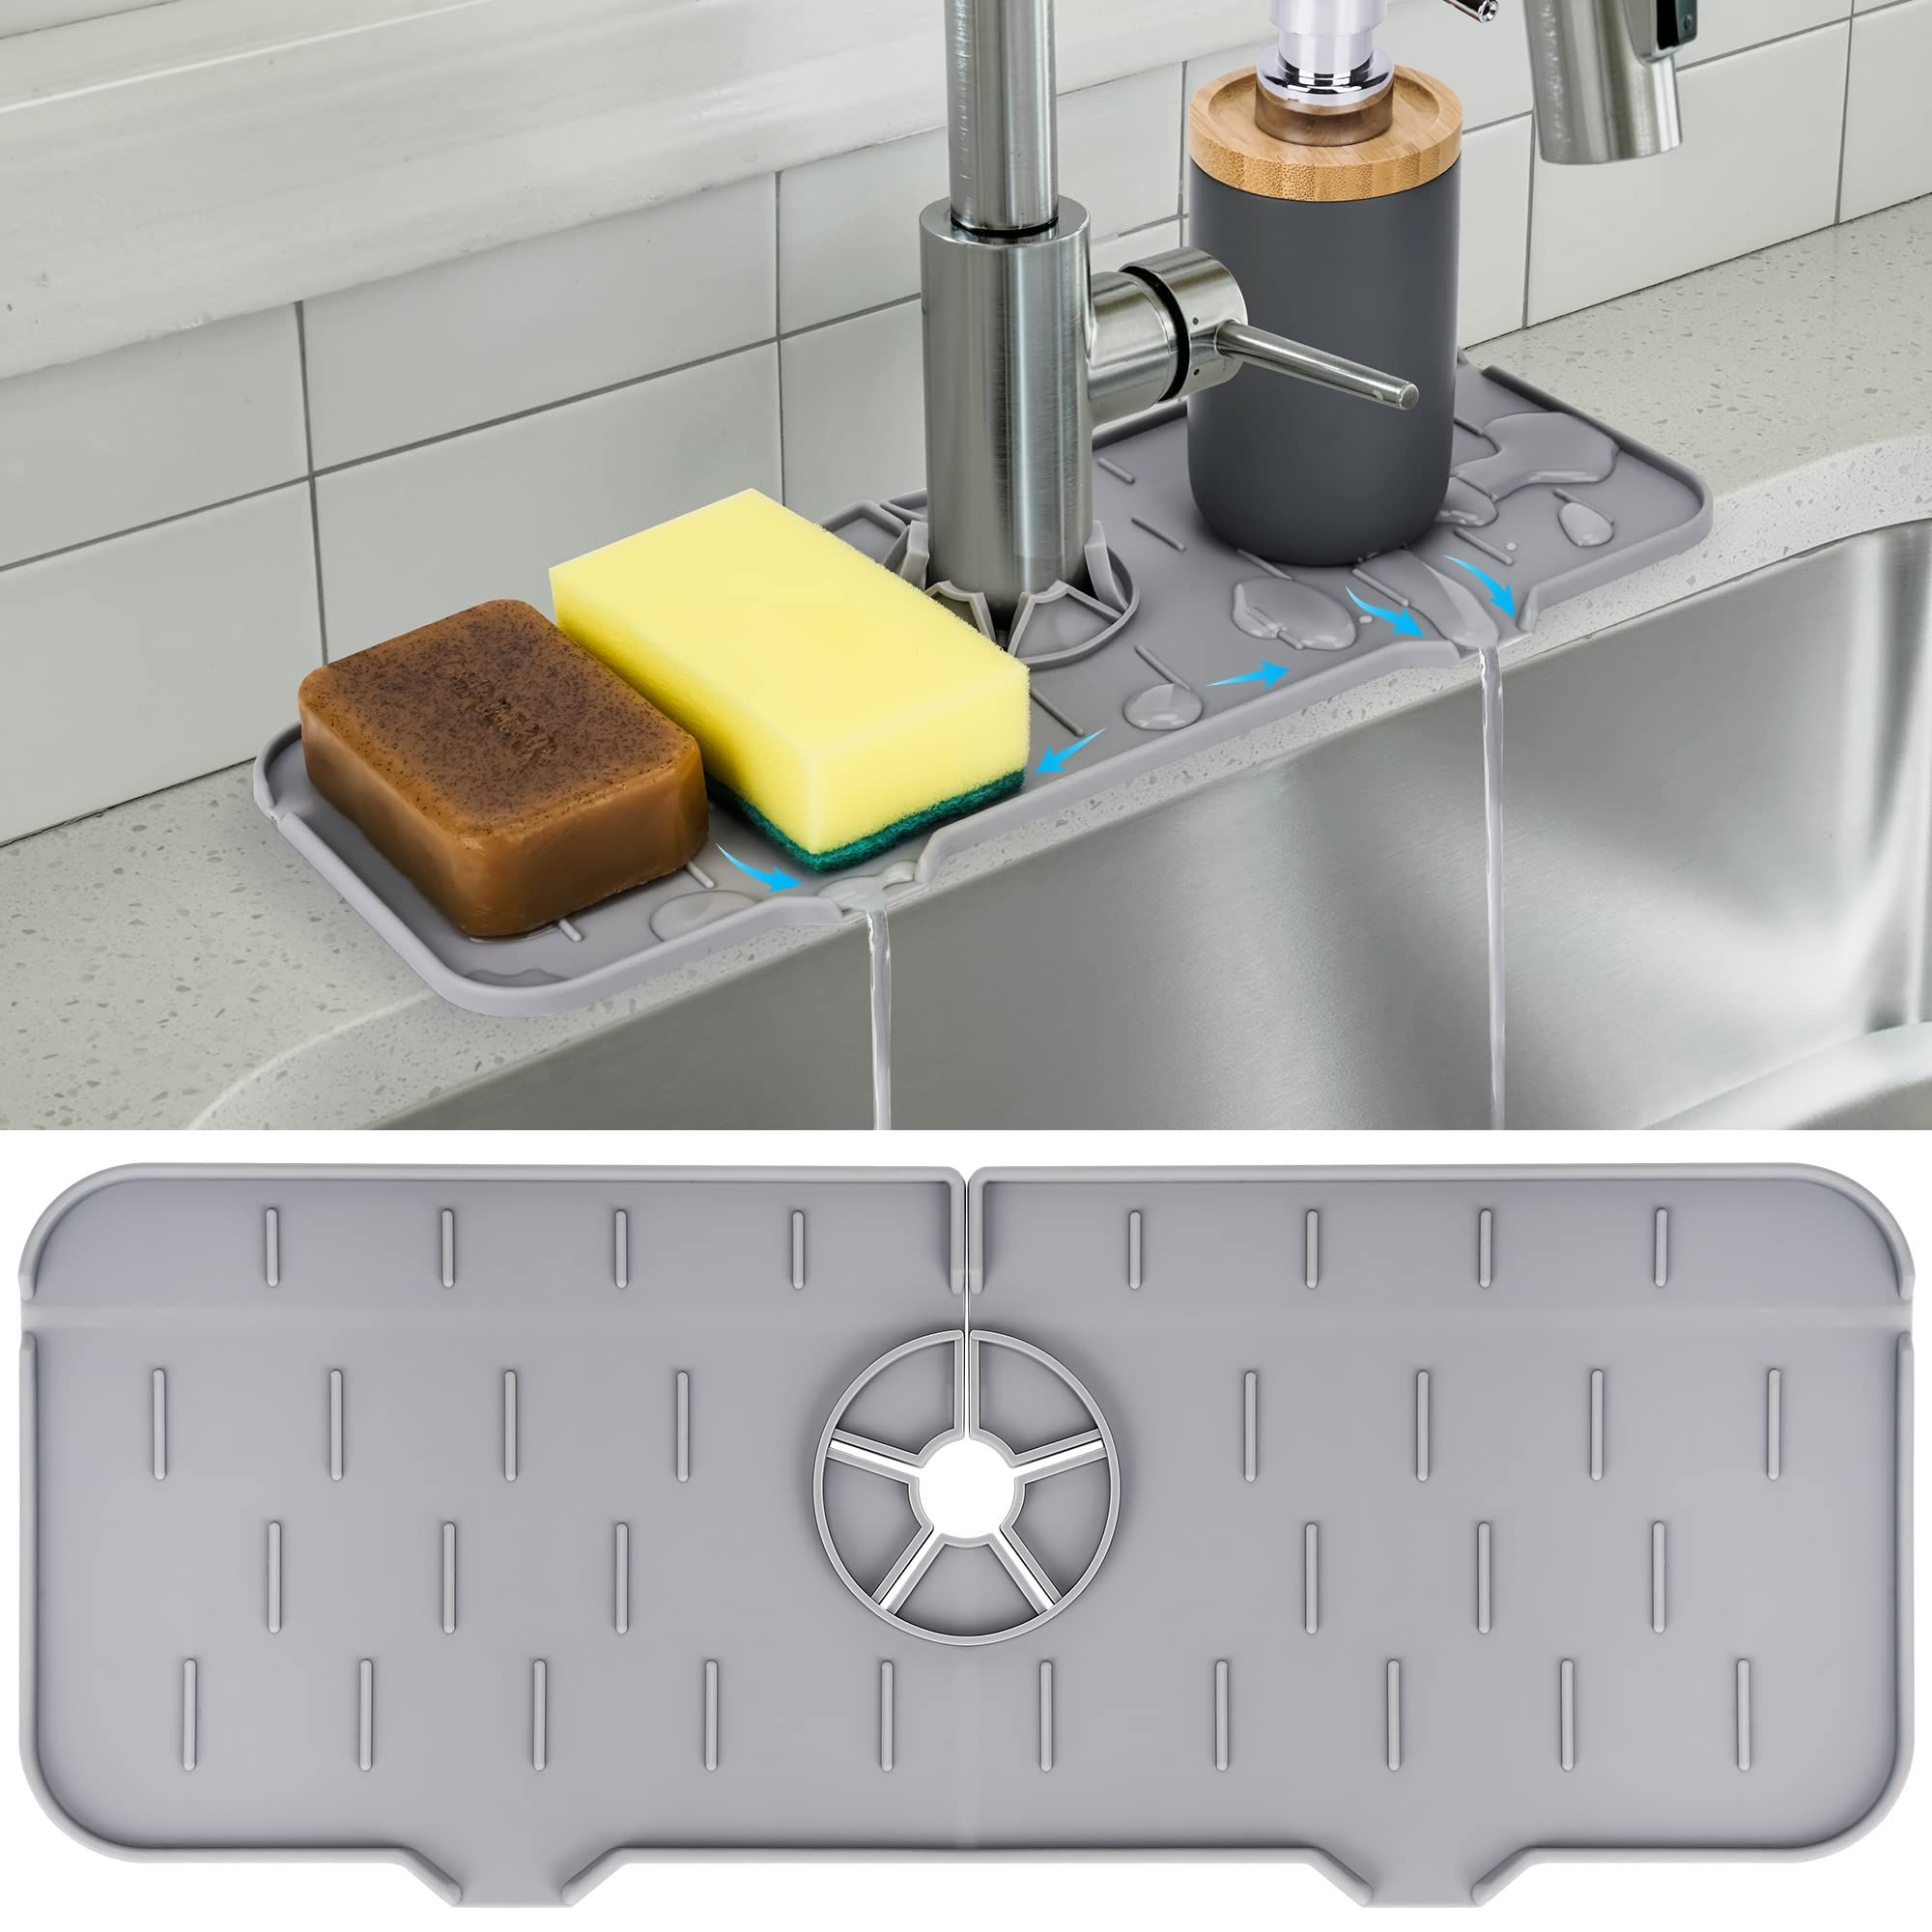 The Best Kitchen Faucet Mats to Keep Your Counters Dry